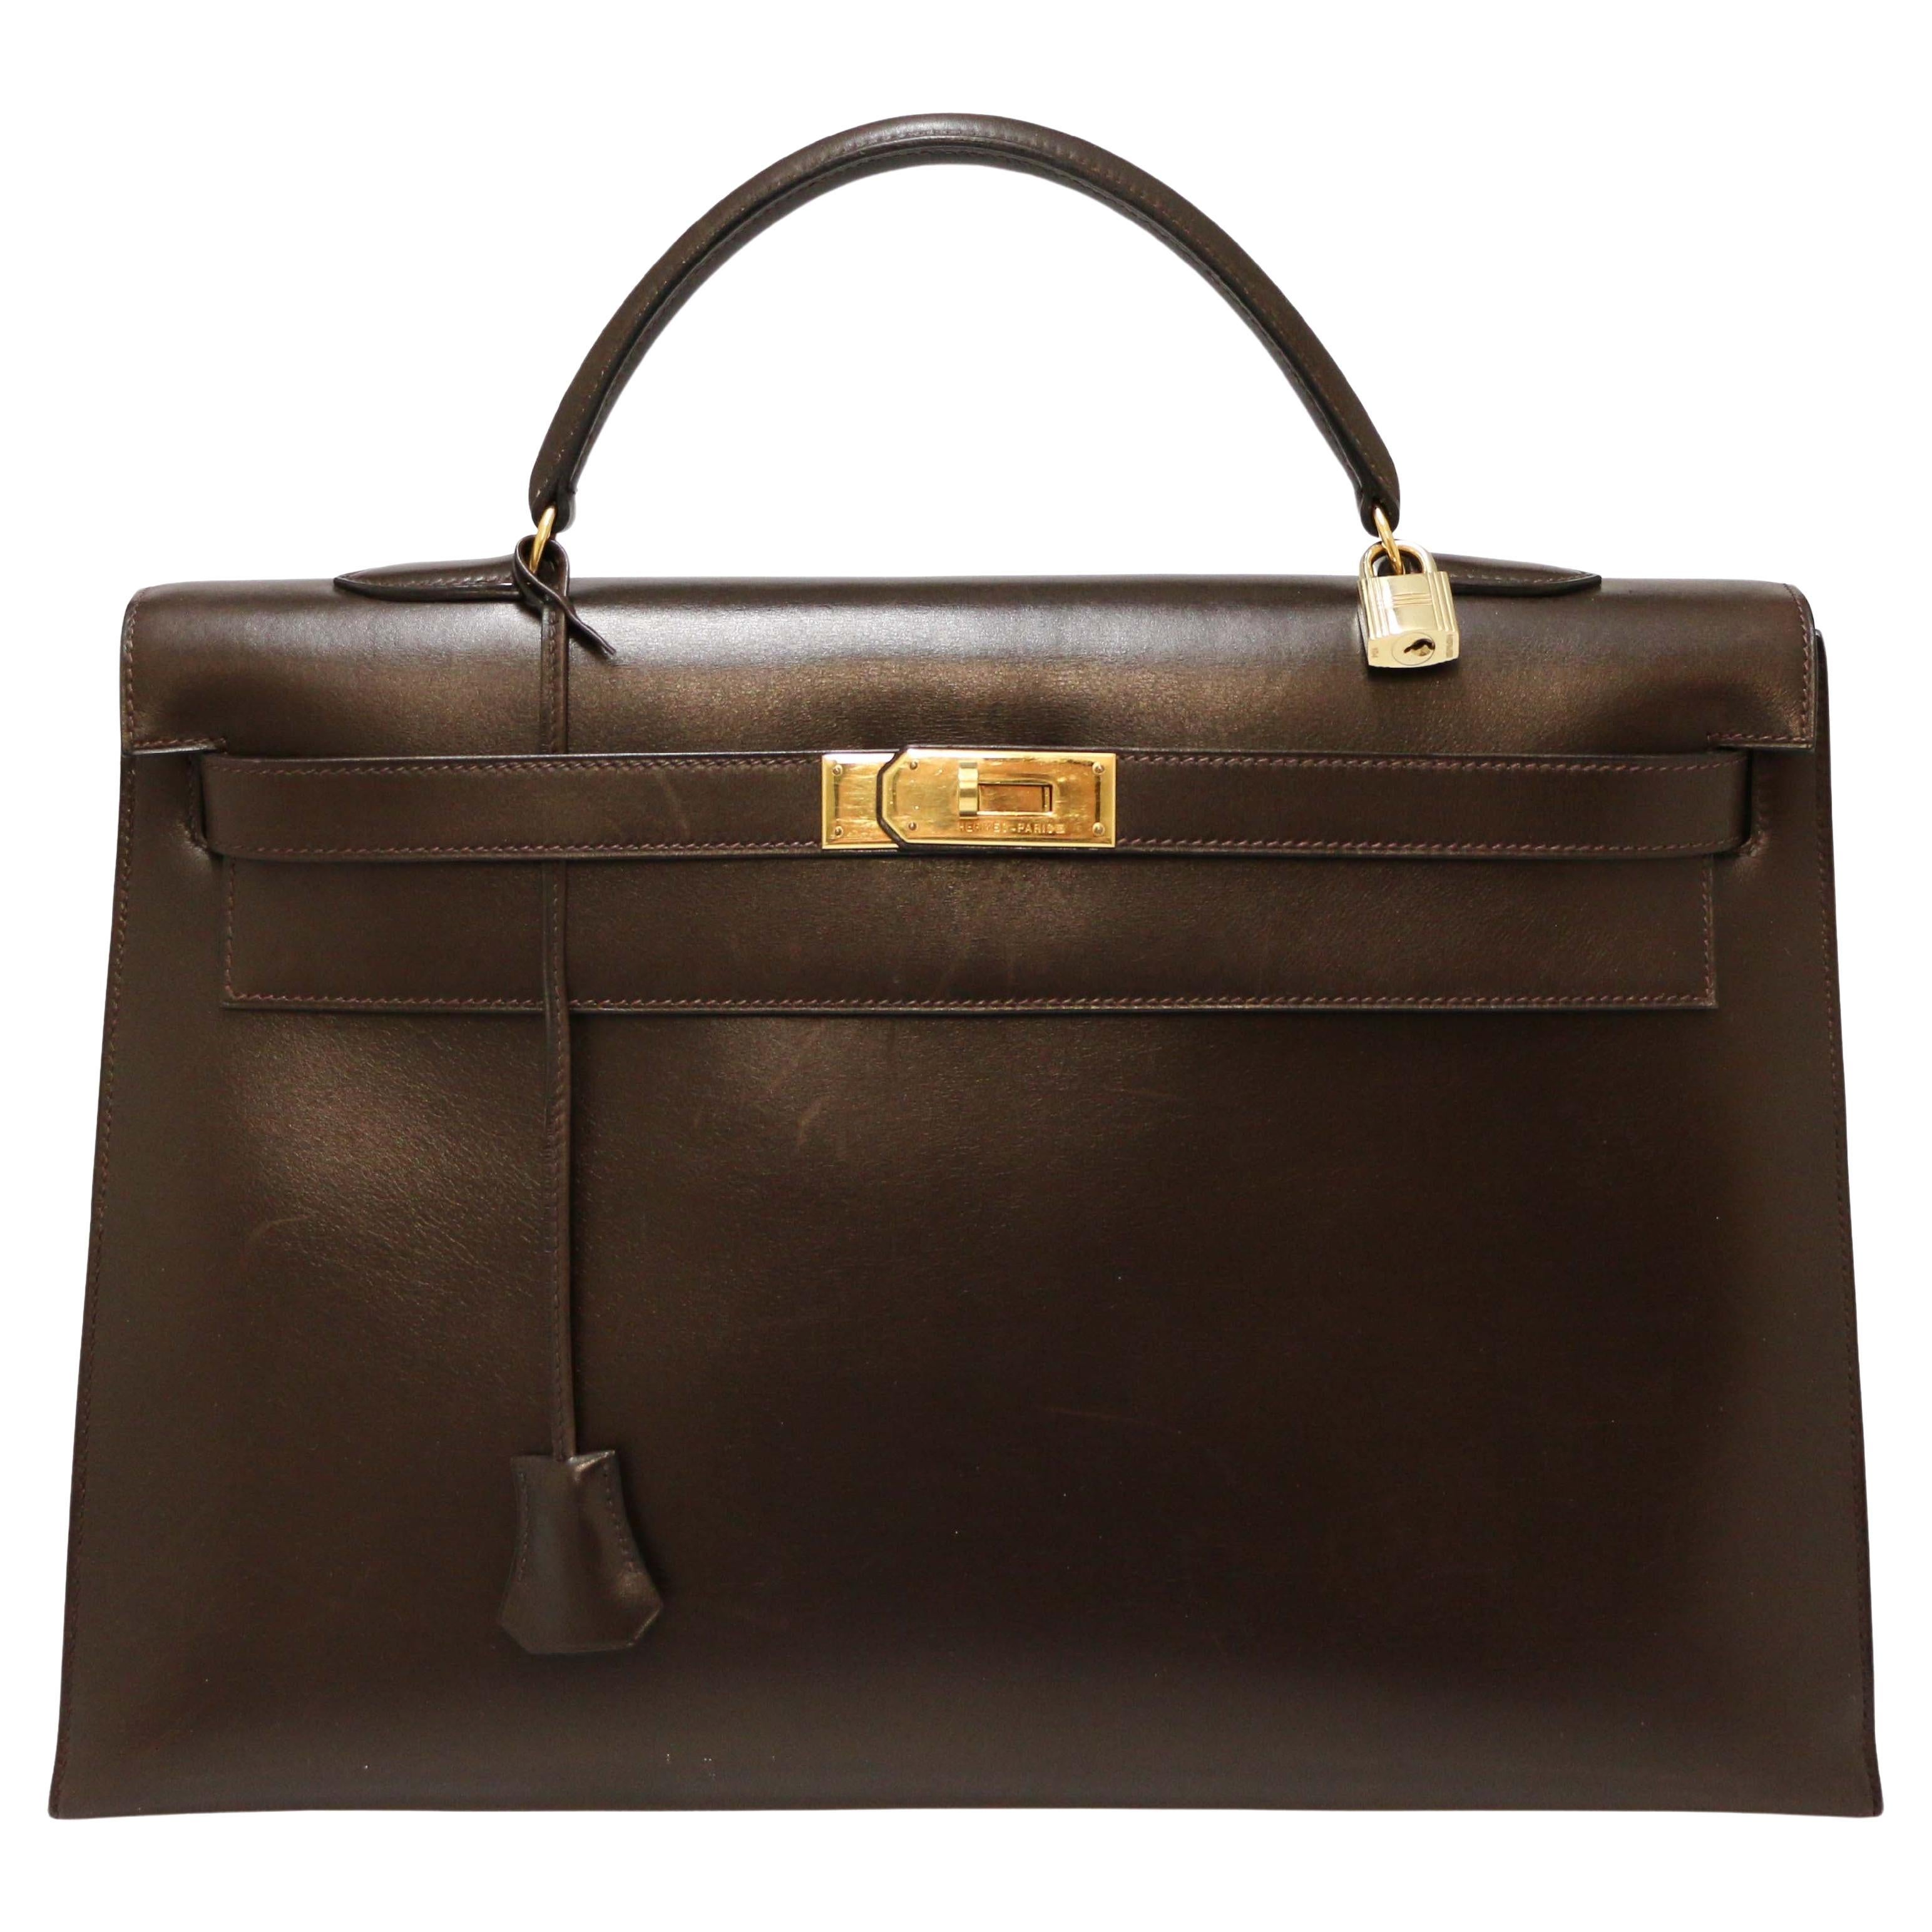 What is the oldest Hermès bag?